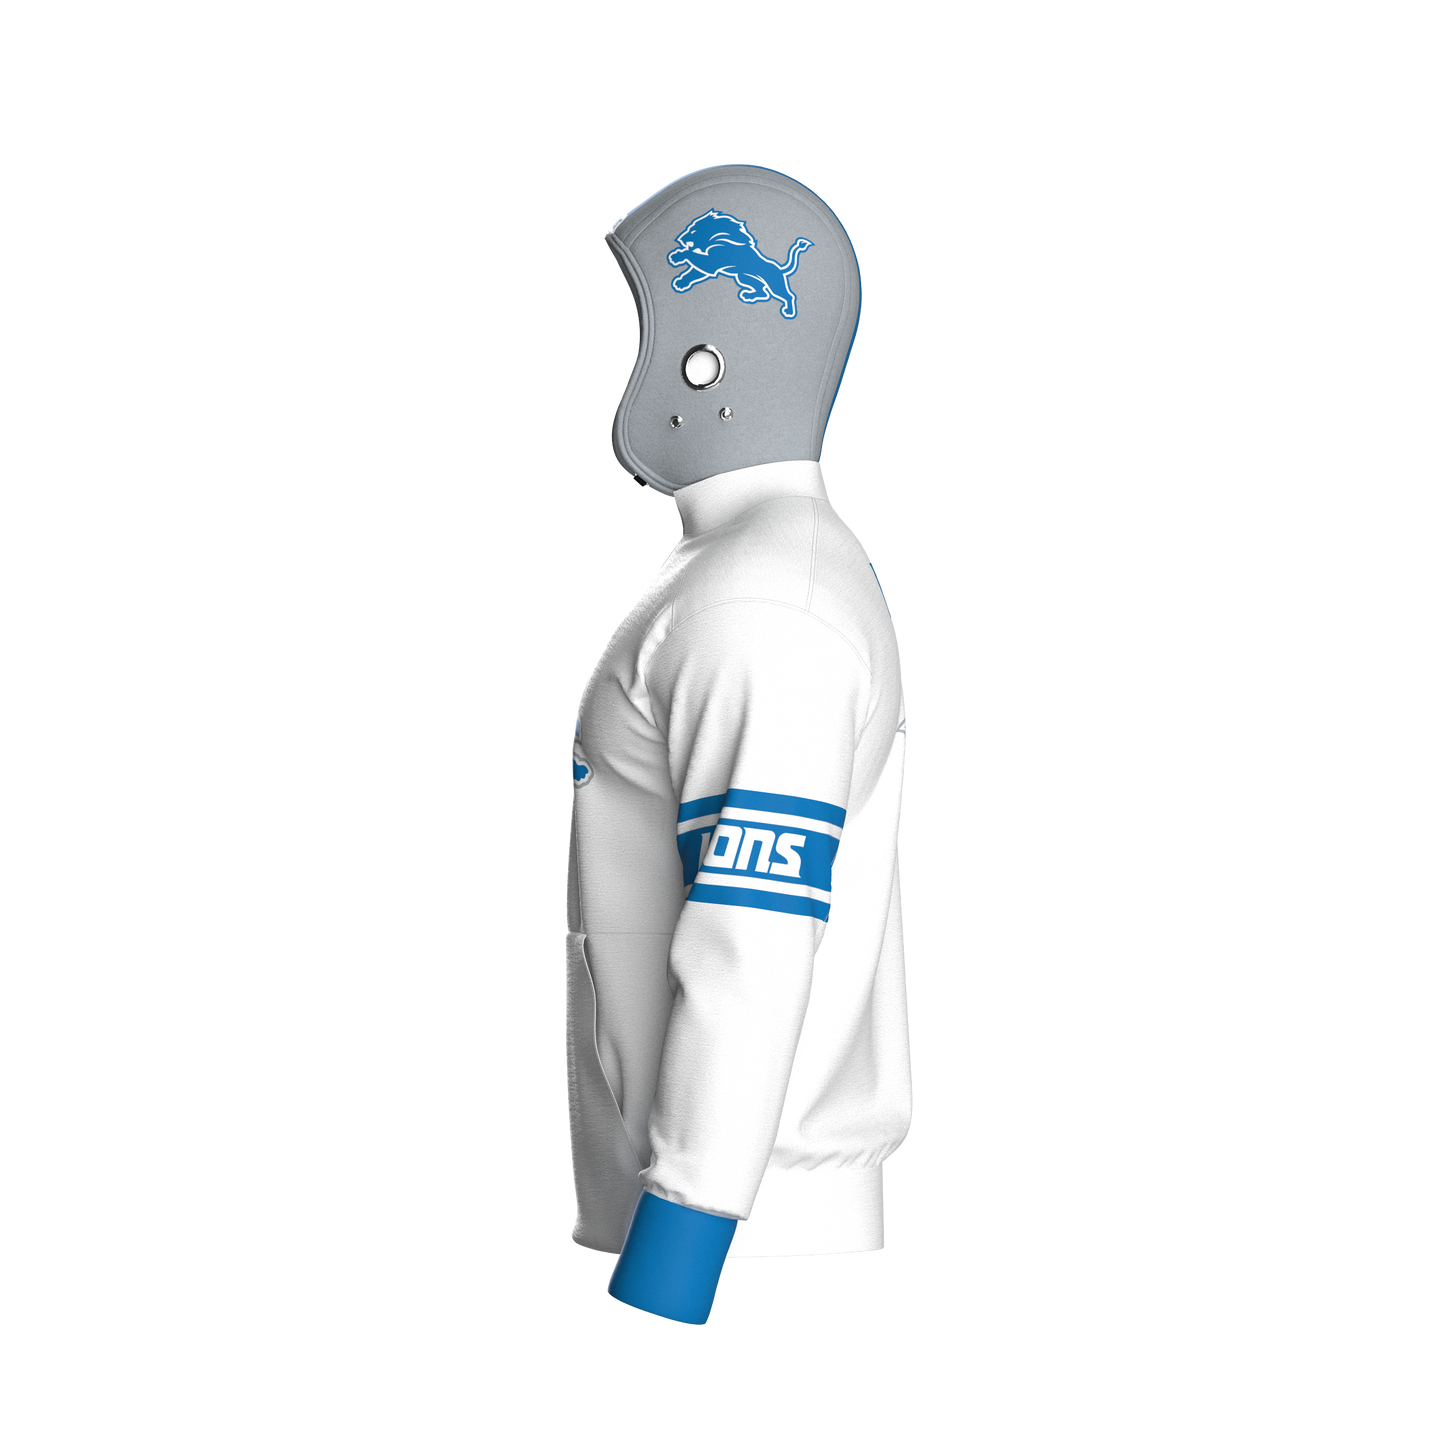 Detroit Lions Away Pullover (youth)